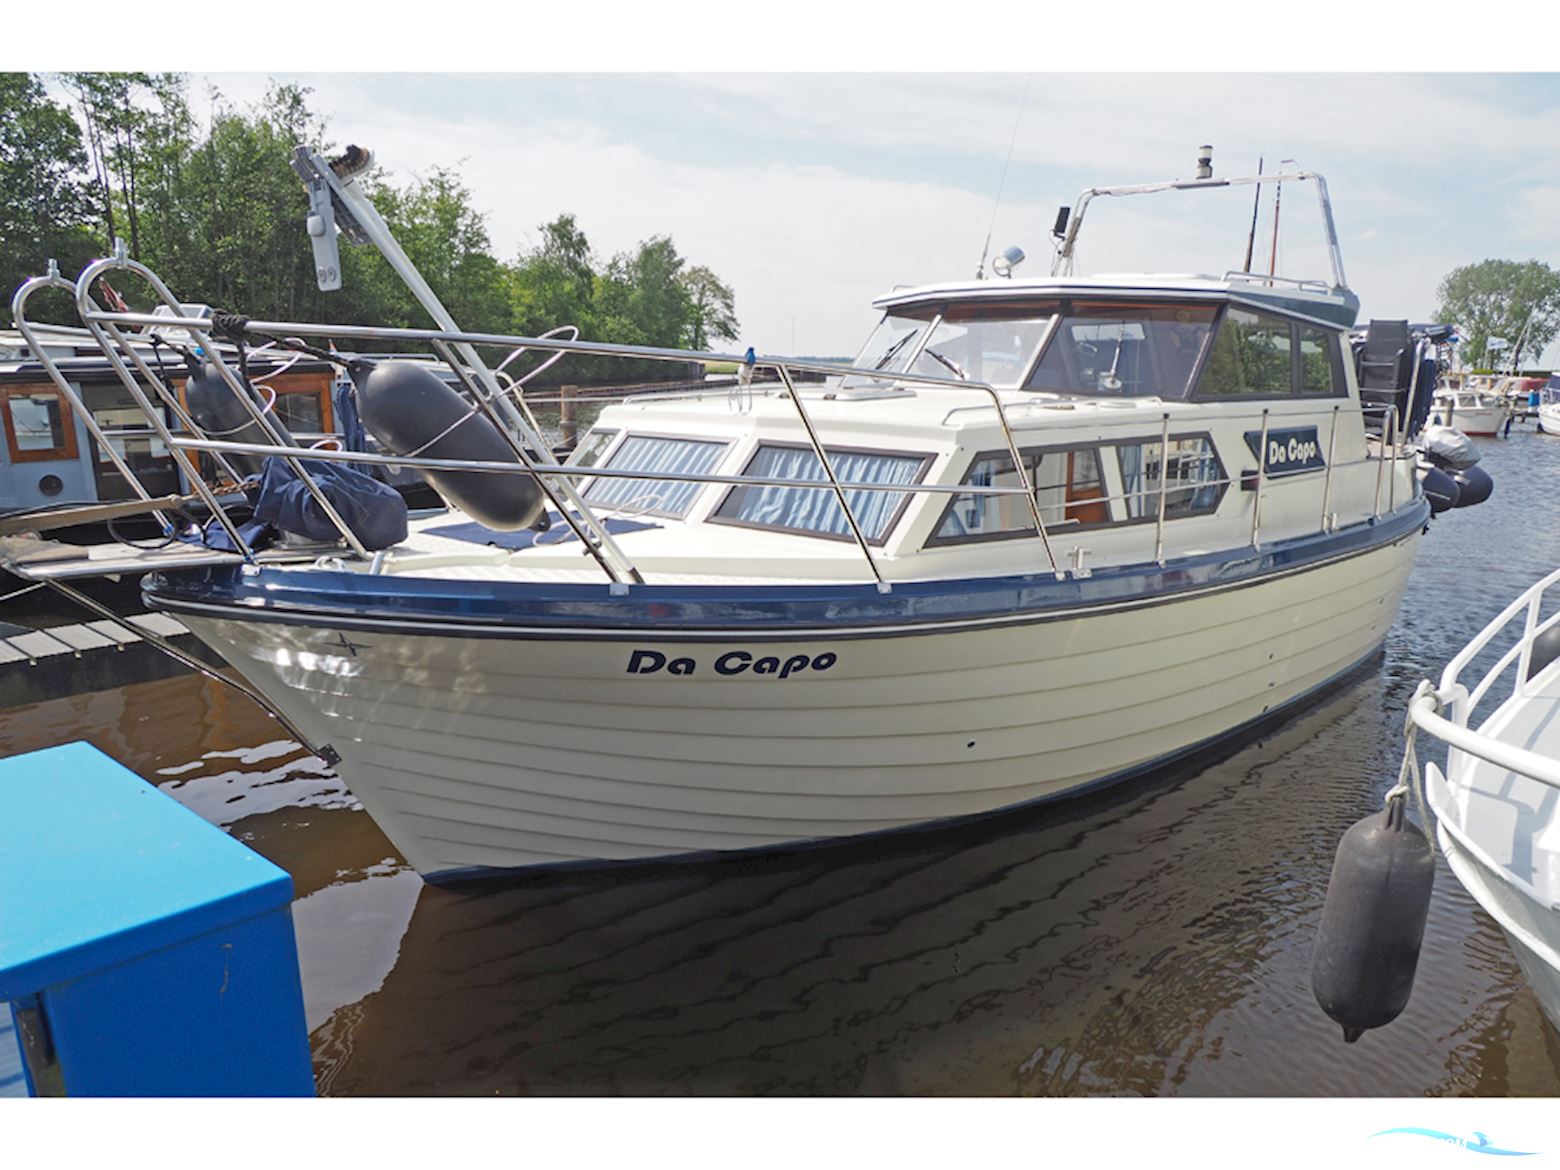 Lunde Skagerrak 900 S AK Motor boat 1992, with Yanmar 4LH-Hte engine, The Netherlands